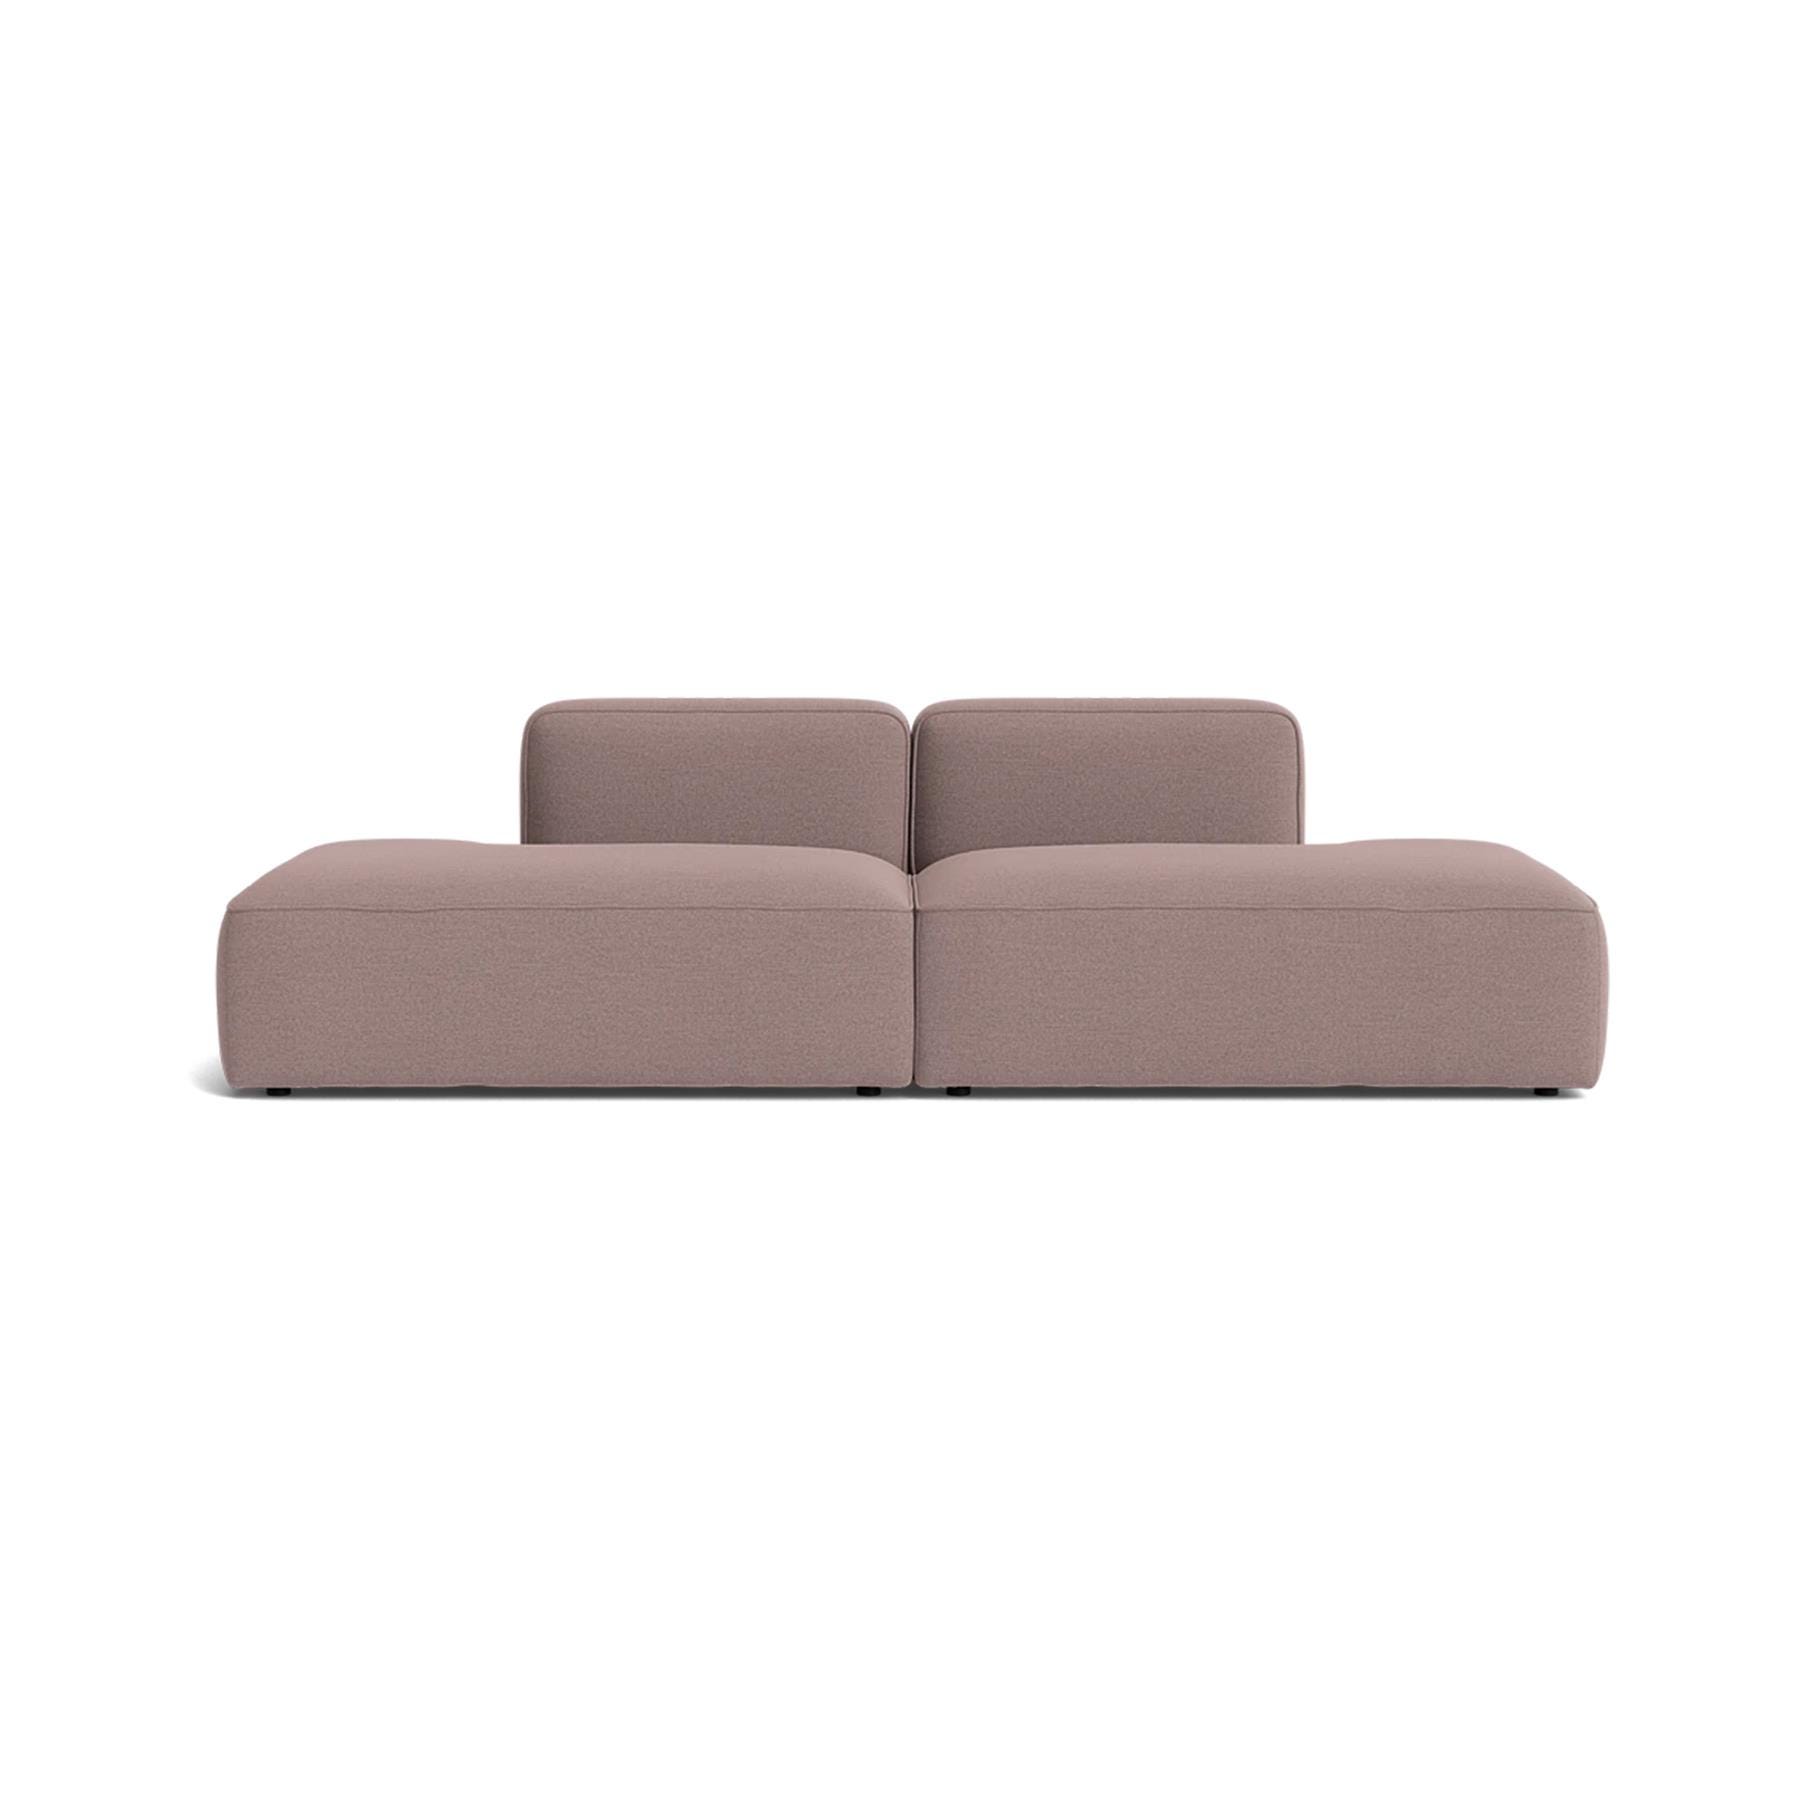 Make Nordic Basecamp Sofa With 2 Open Ends Rewool 648 Pink Designer Furniture From Holloways Of Ludlow